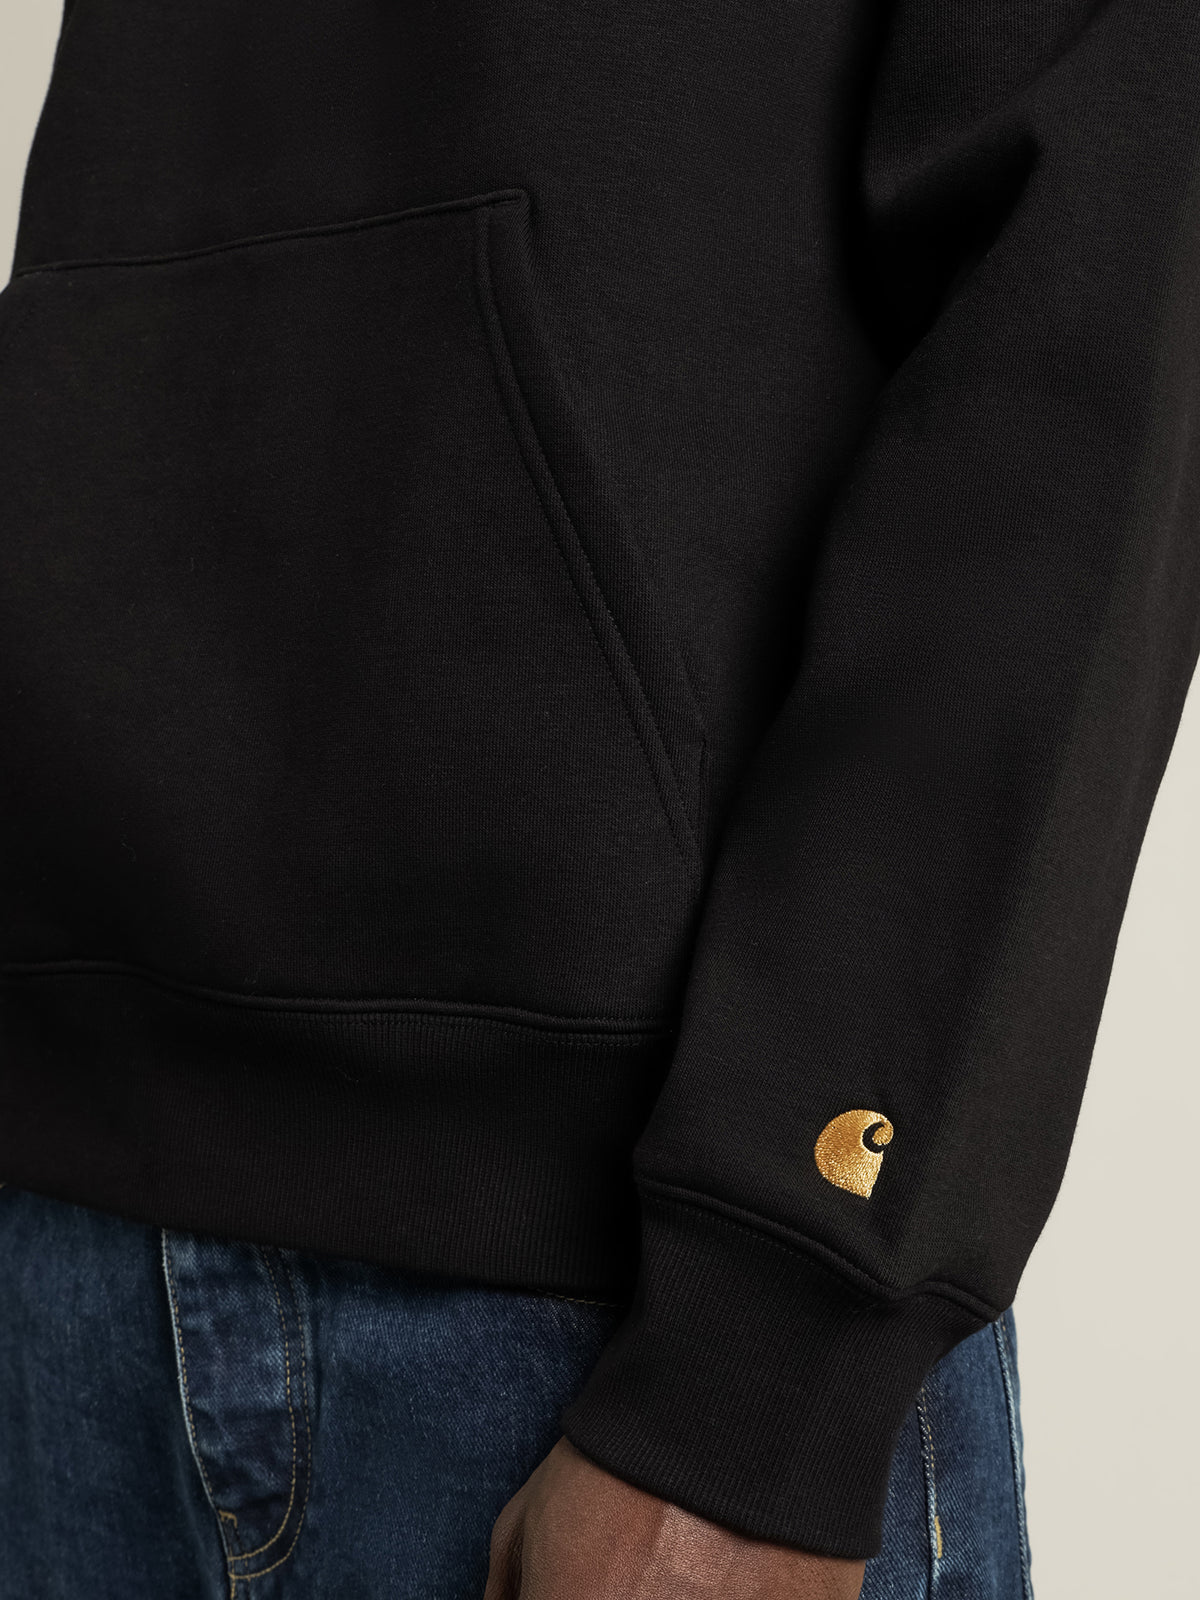 Chase Neck Zip Sweat in Black